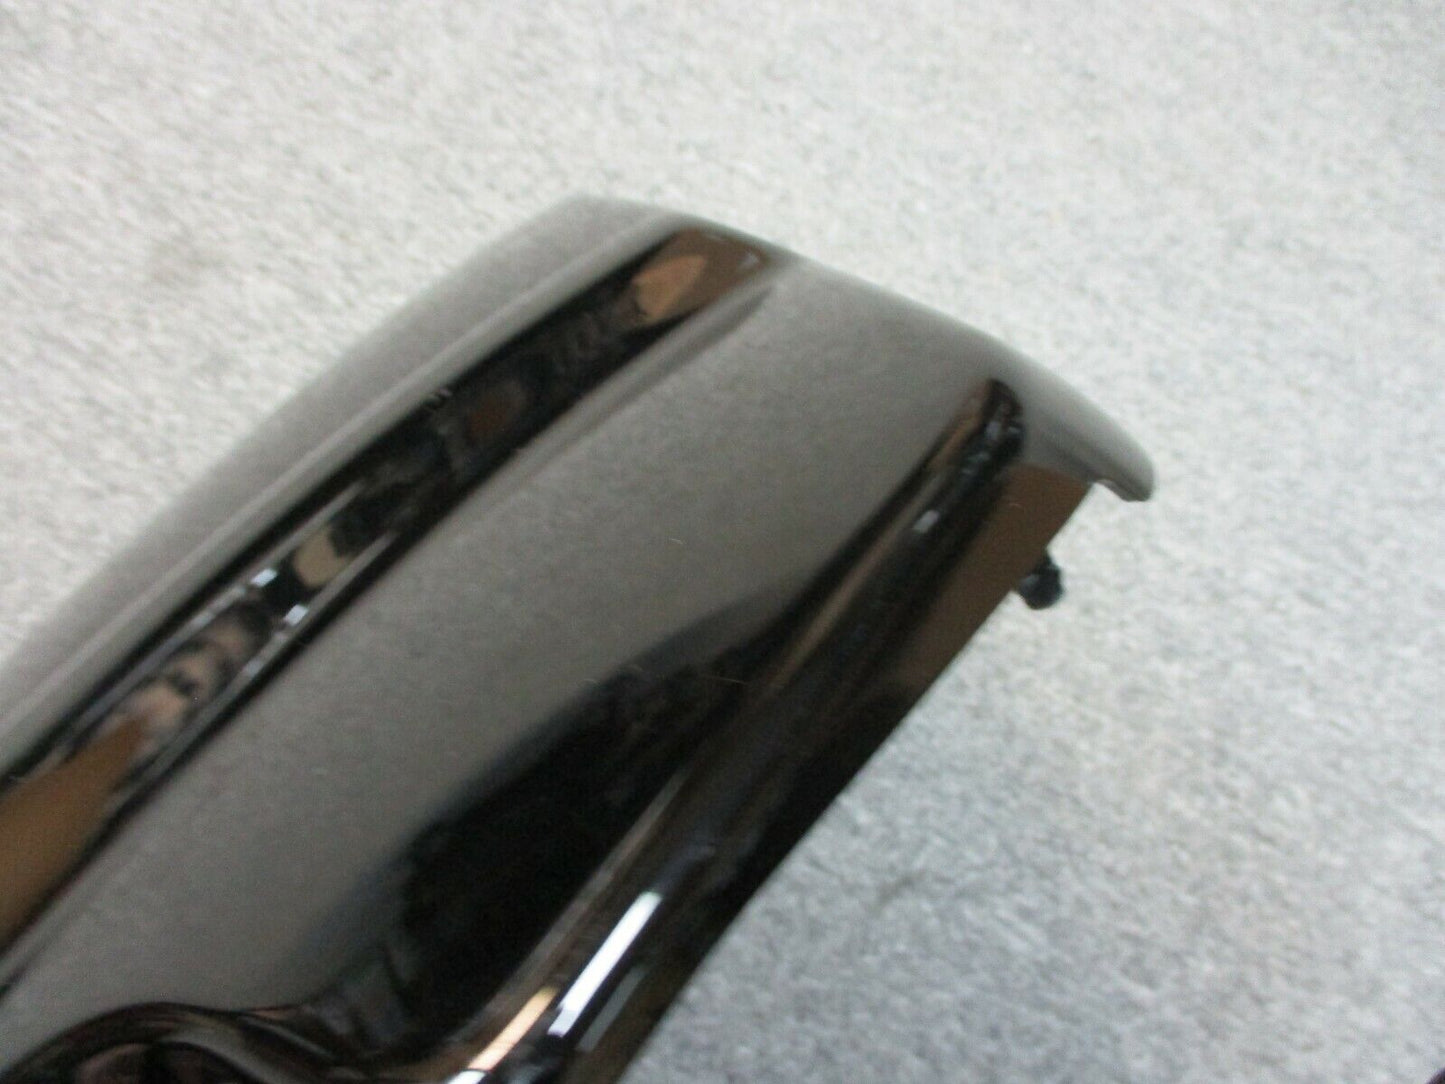 Harley Davidson OEM Right Side Cover Vivid Black with Silver Stripes 66048-09A